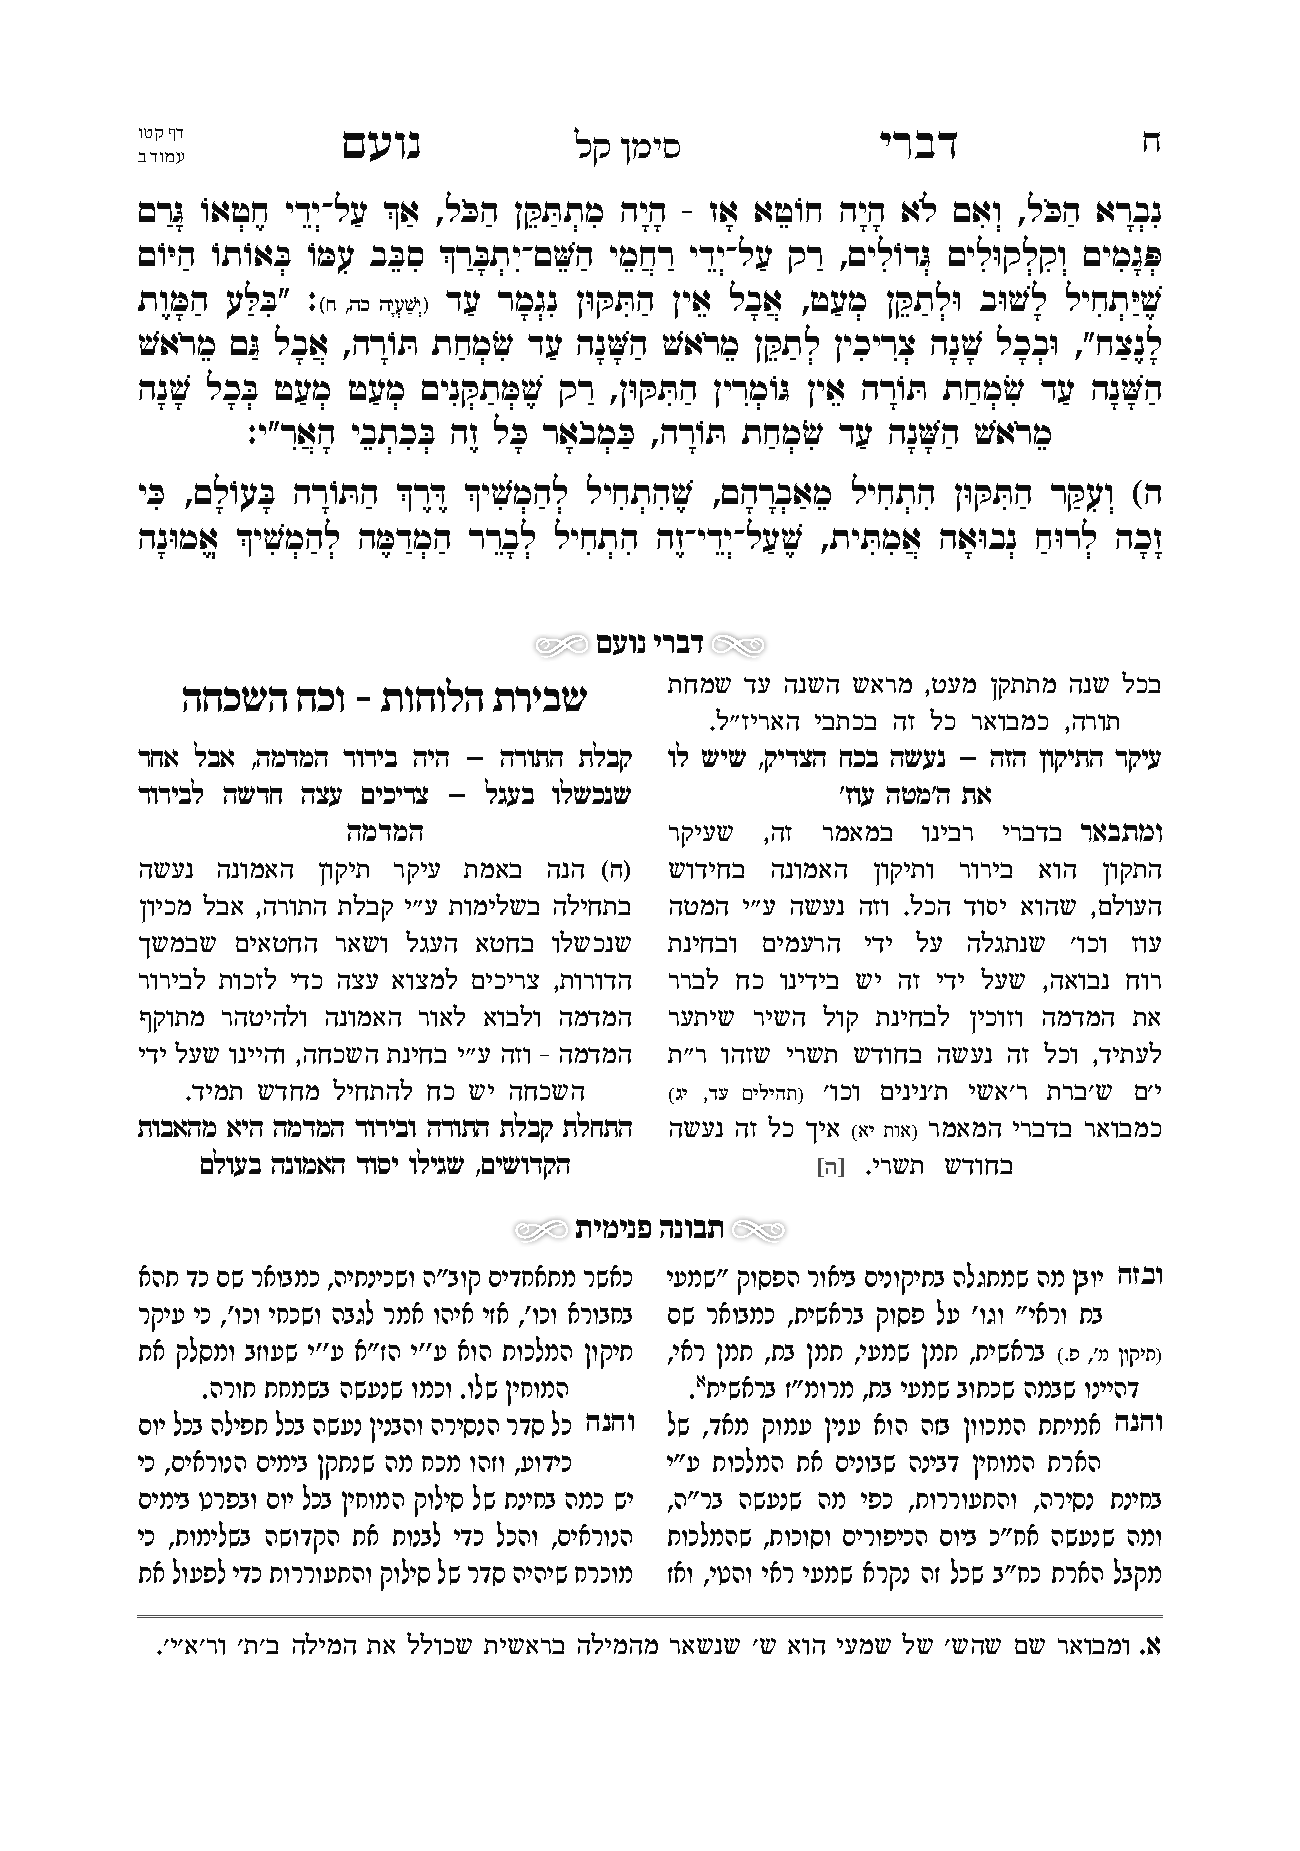 Pages from צורת הדף 2 - ליקוטי הלכות.png